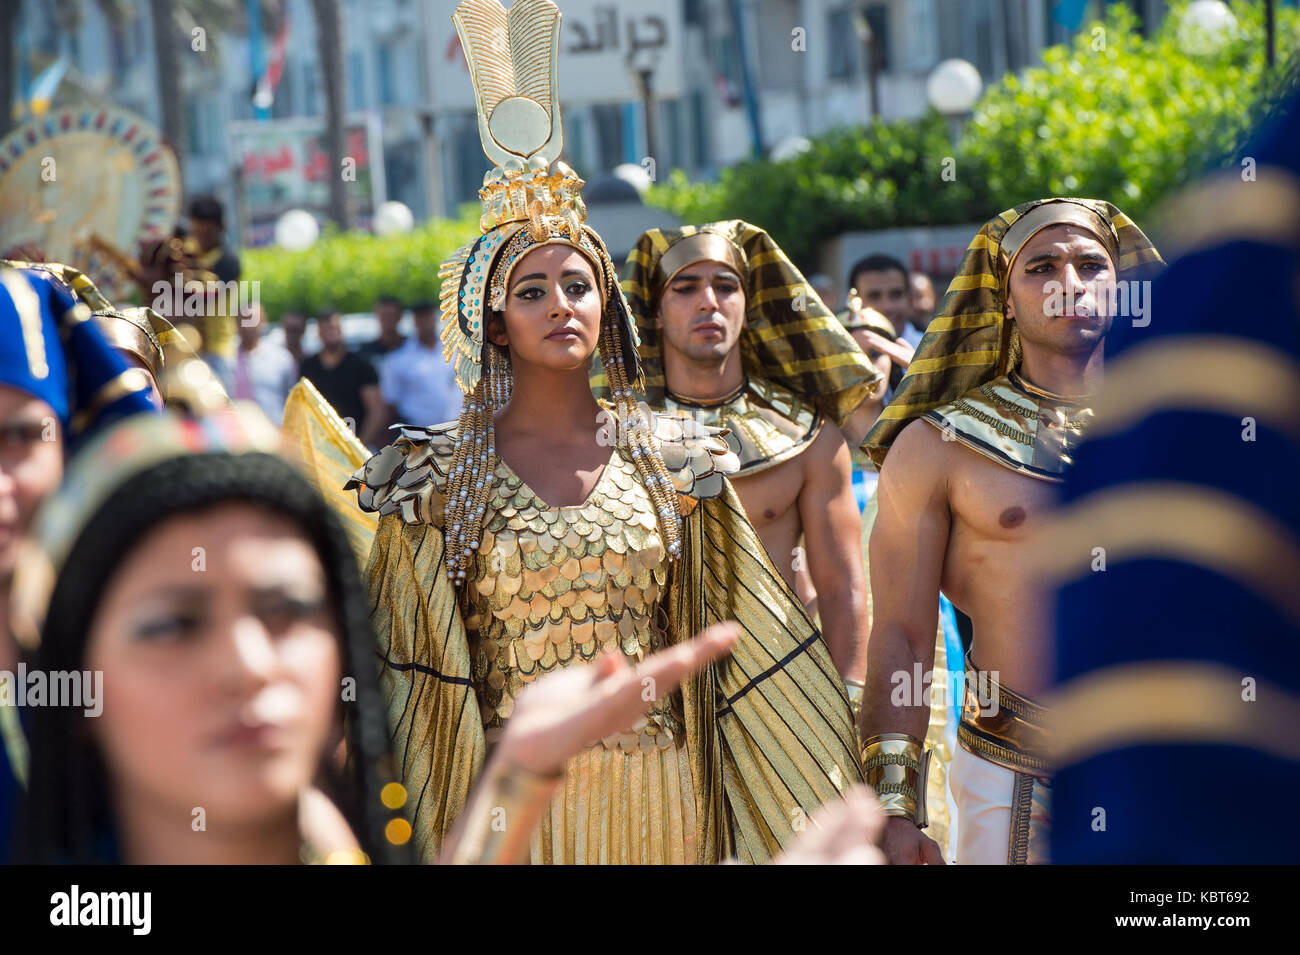 Alexandria, Egypt. 30th Sep, 2017. A young lady playing Queen Cleopatra (C) participates in a festive event themed 'Cleopatra's Dream', in Alexandria City, Egypt, Sept. 30, 2017. The Egyptian coastal province of Alexandria on Saturday held a festive event themed 'Cleopatra's Dream' to highlight the discovered sunken palace and city of the ancient Egyptian queen. Credit: Meng Tao/Xinhua/Alamy Live News Stock Photo